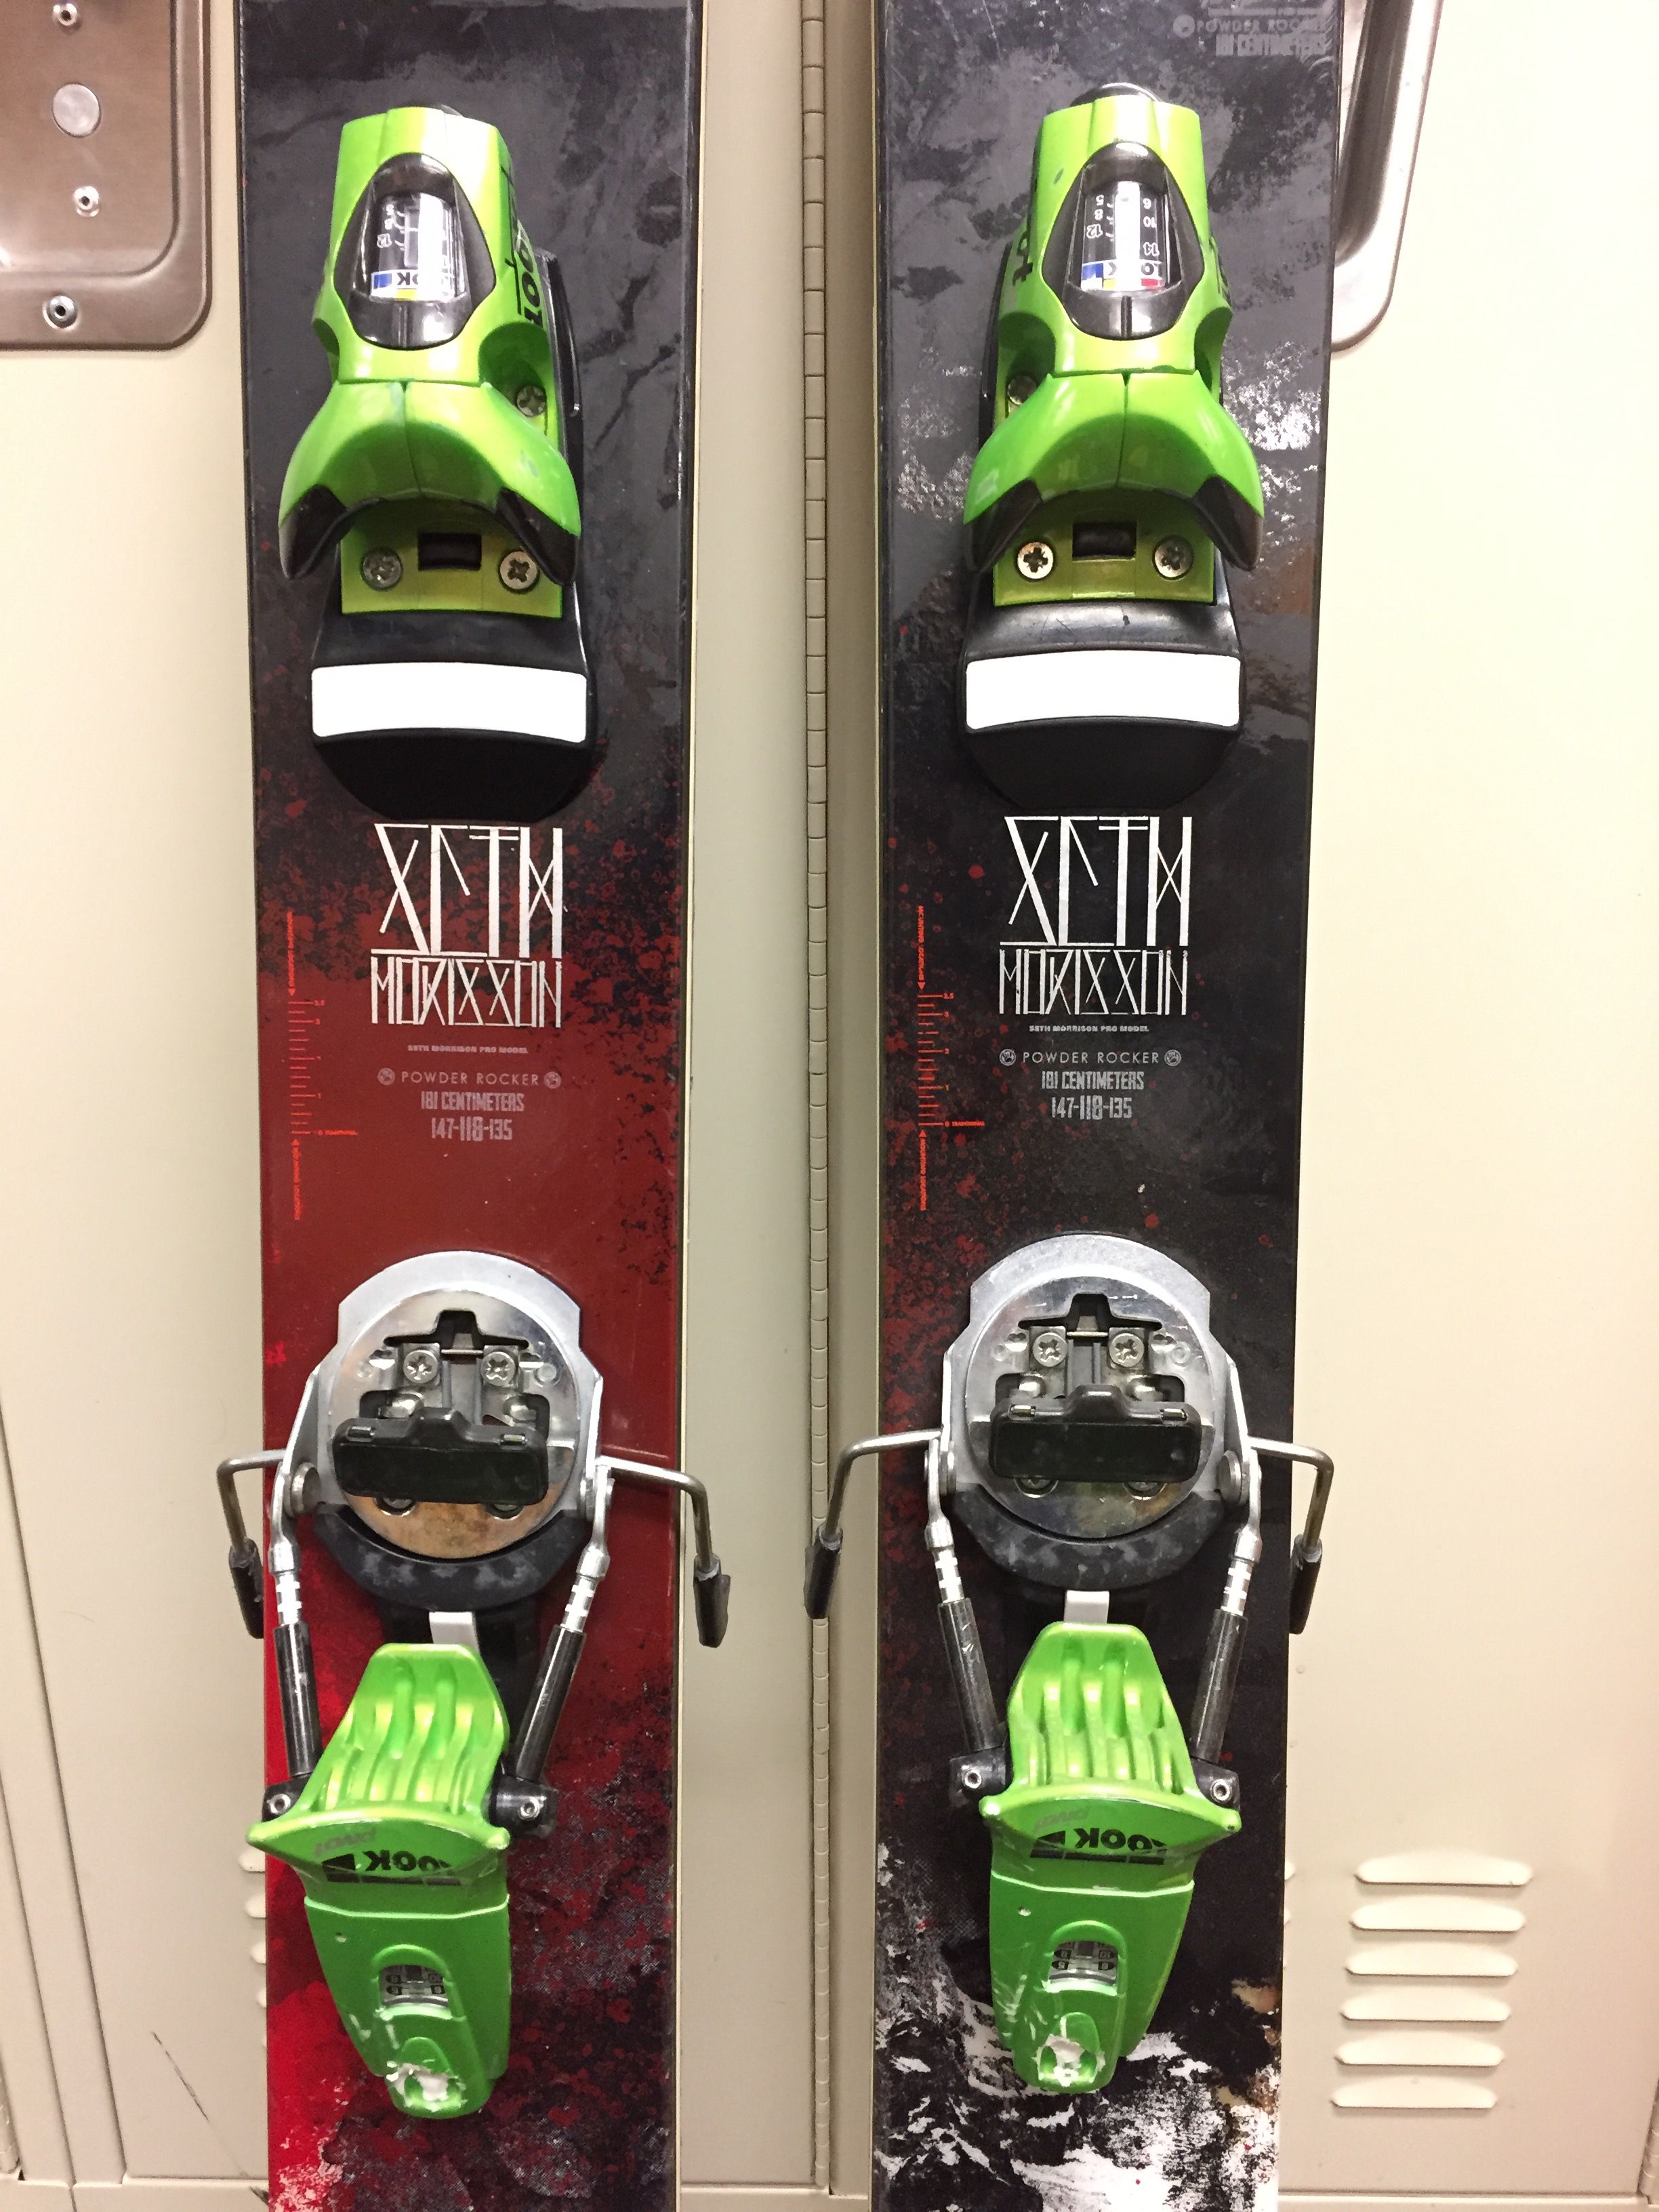 K2 Annex 118 Seth Morrison Pro skis for Sale in Tahoma, CA - OfferUp